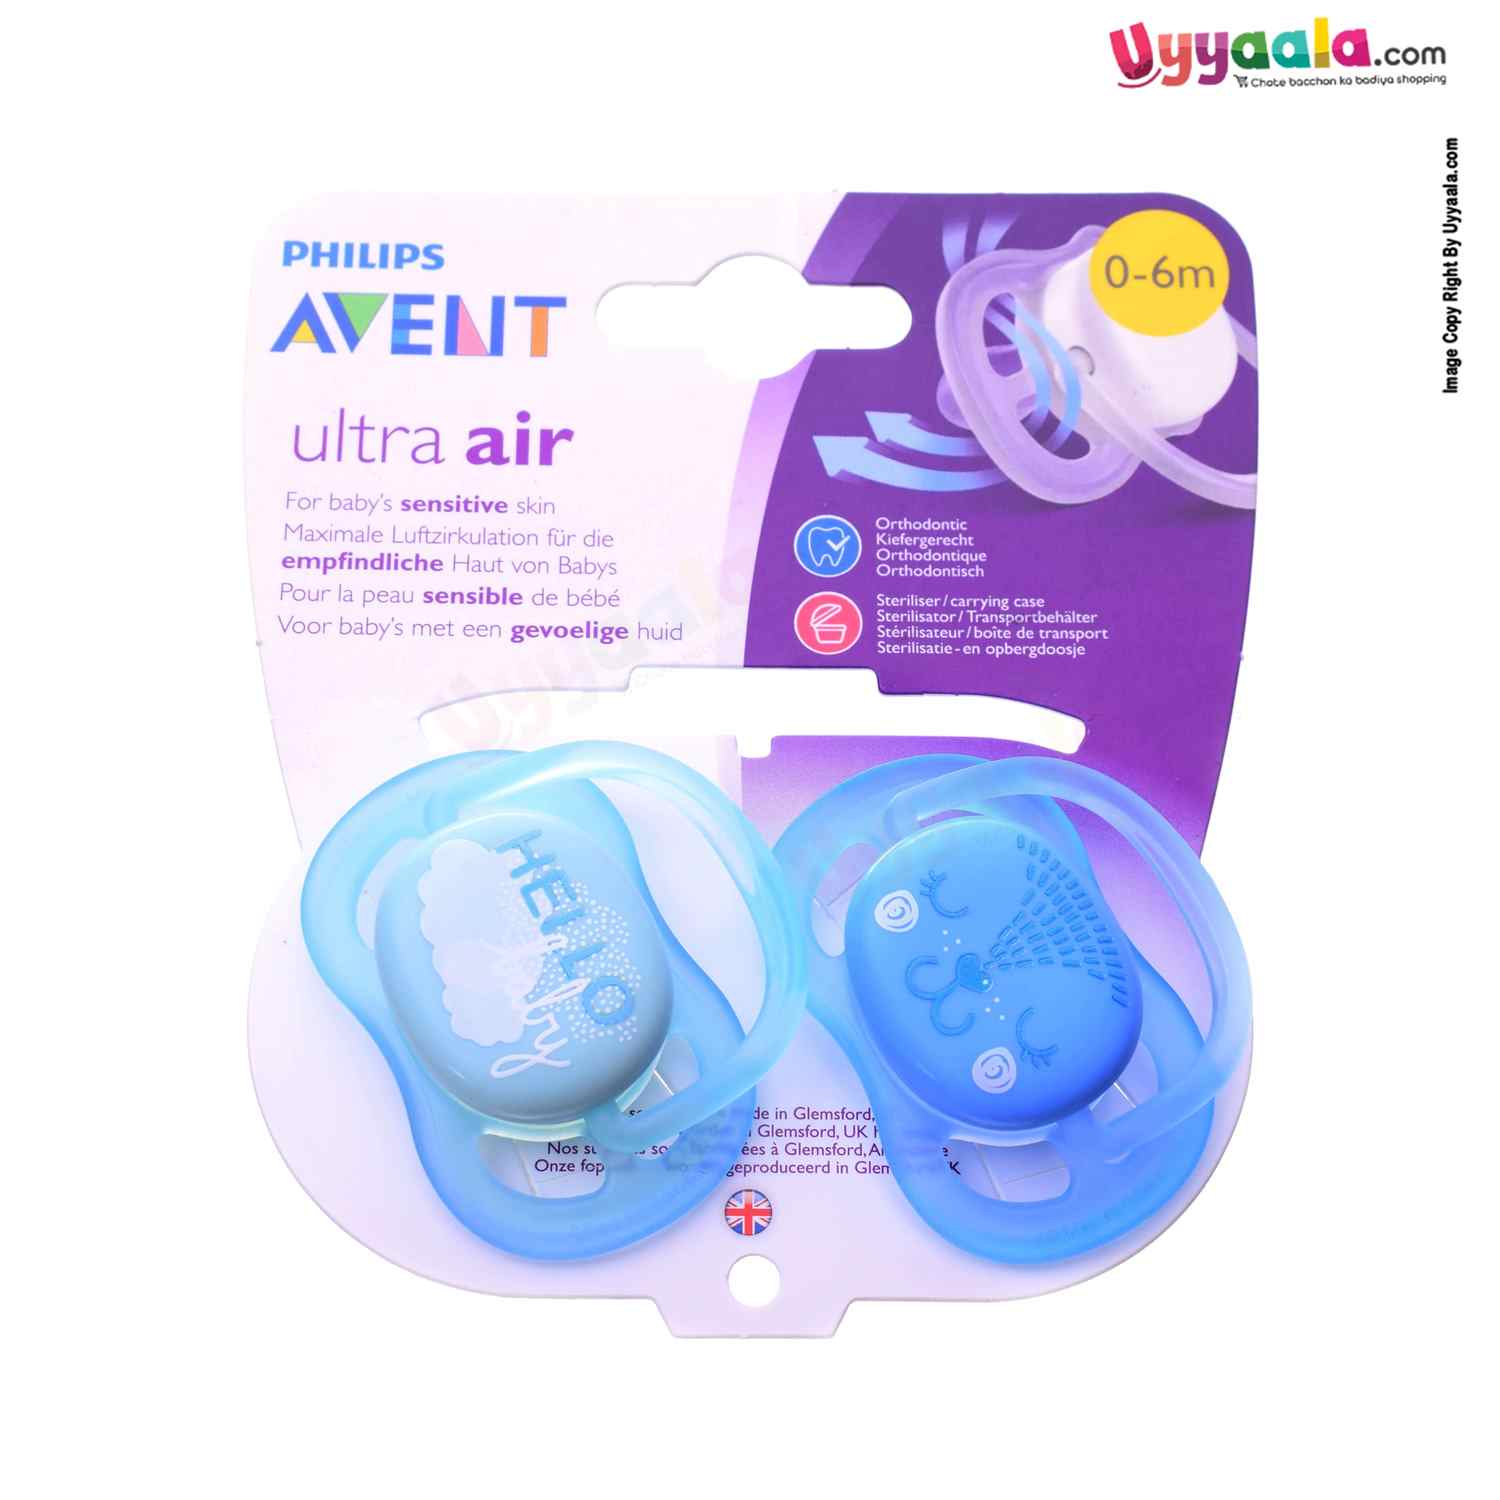 PHILIPS AVENT Extra Air Flow Soother for Babies Twin Pack 0-6m Age, Blue & Hello Baby Print Green